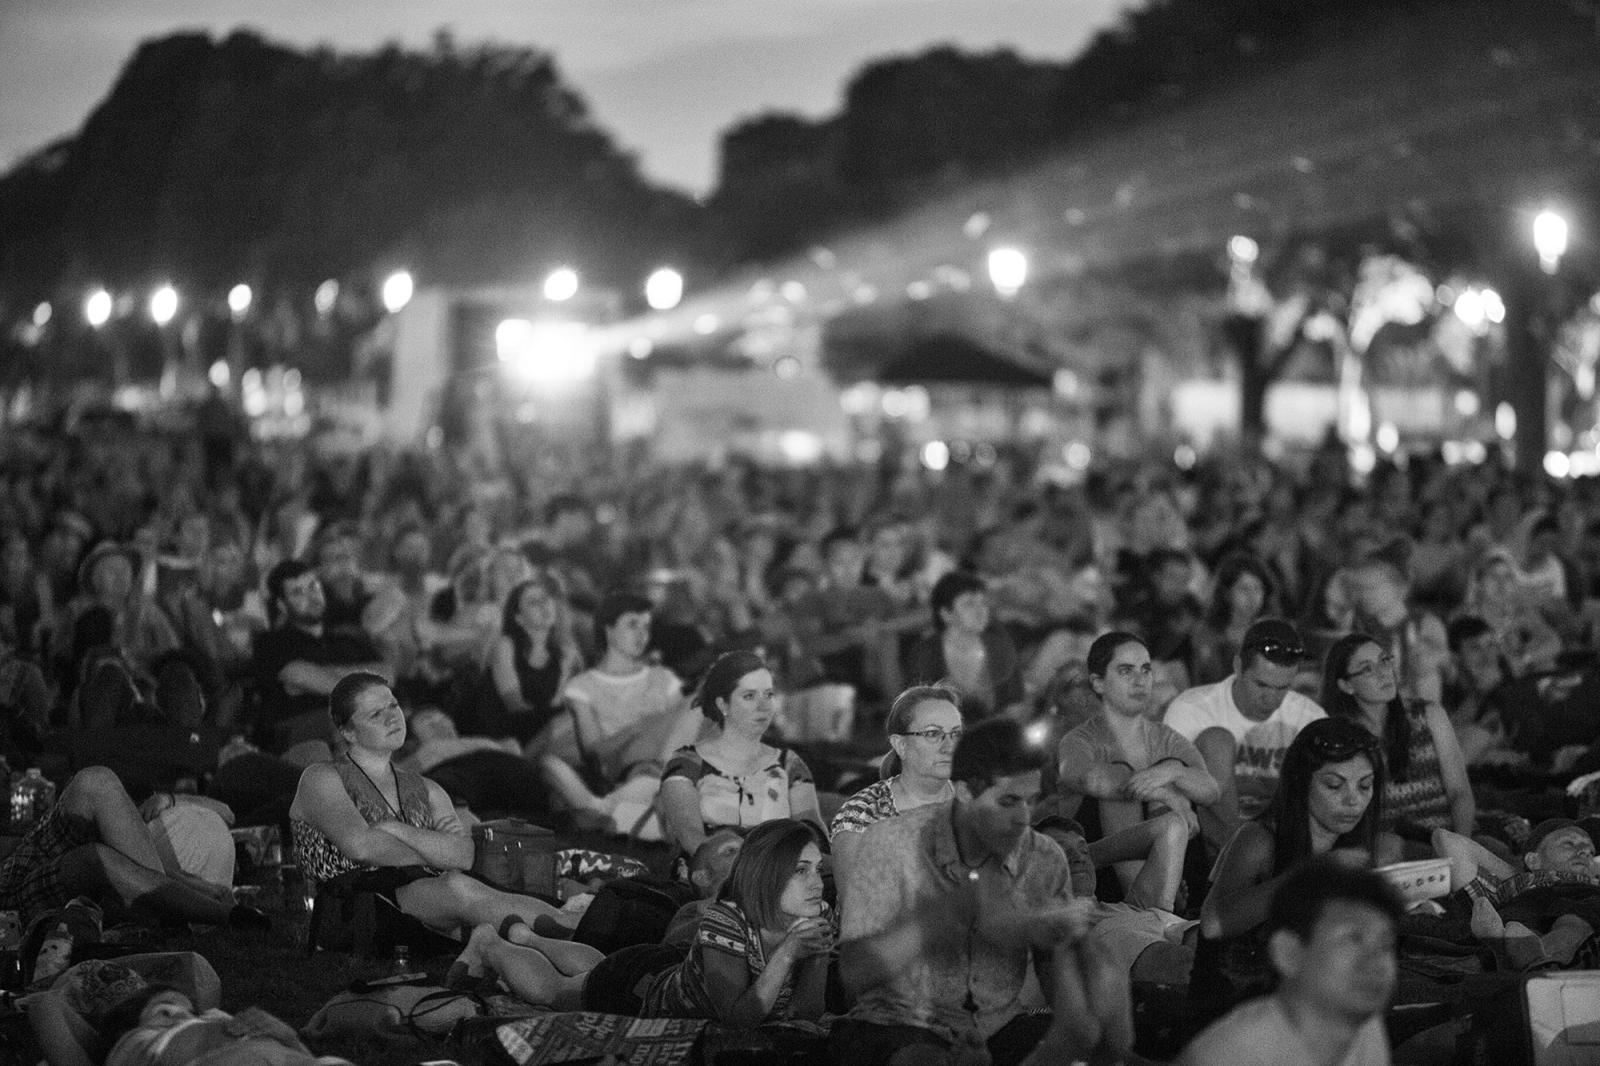 A film shown late on a summer's night to thousands who come to the Mall for "Movie" night : The National MALL : David Burnett | Photographer